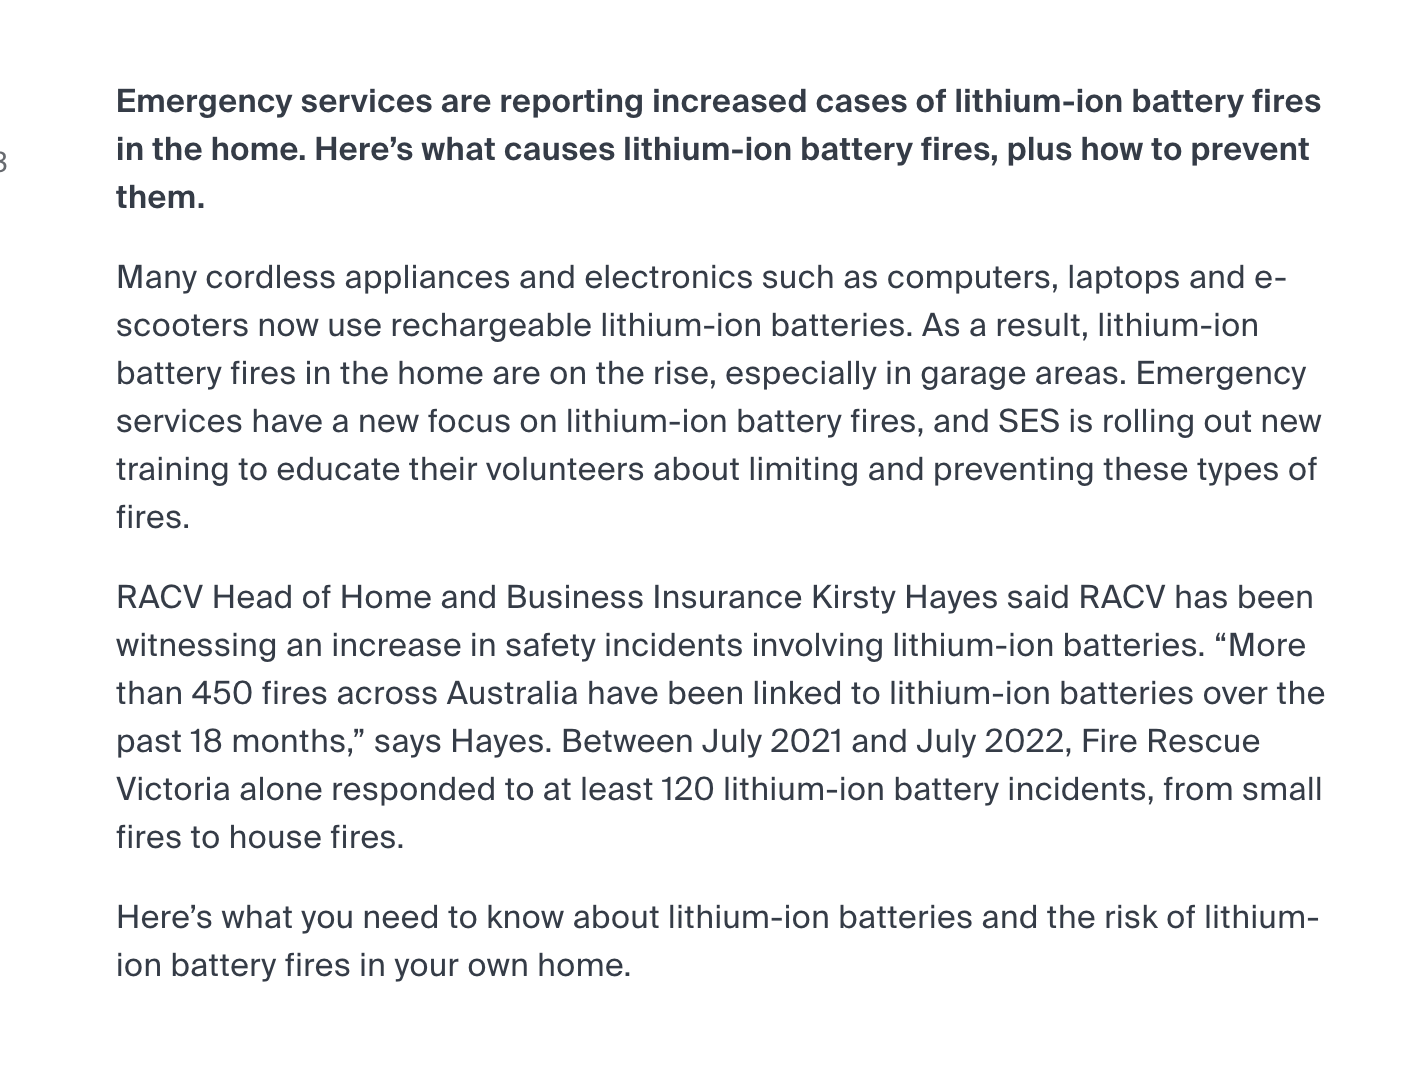 RACV notice on increased lithium battery fires in the home.